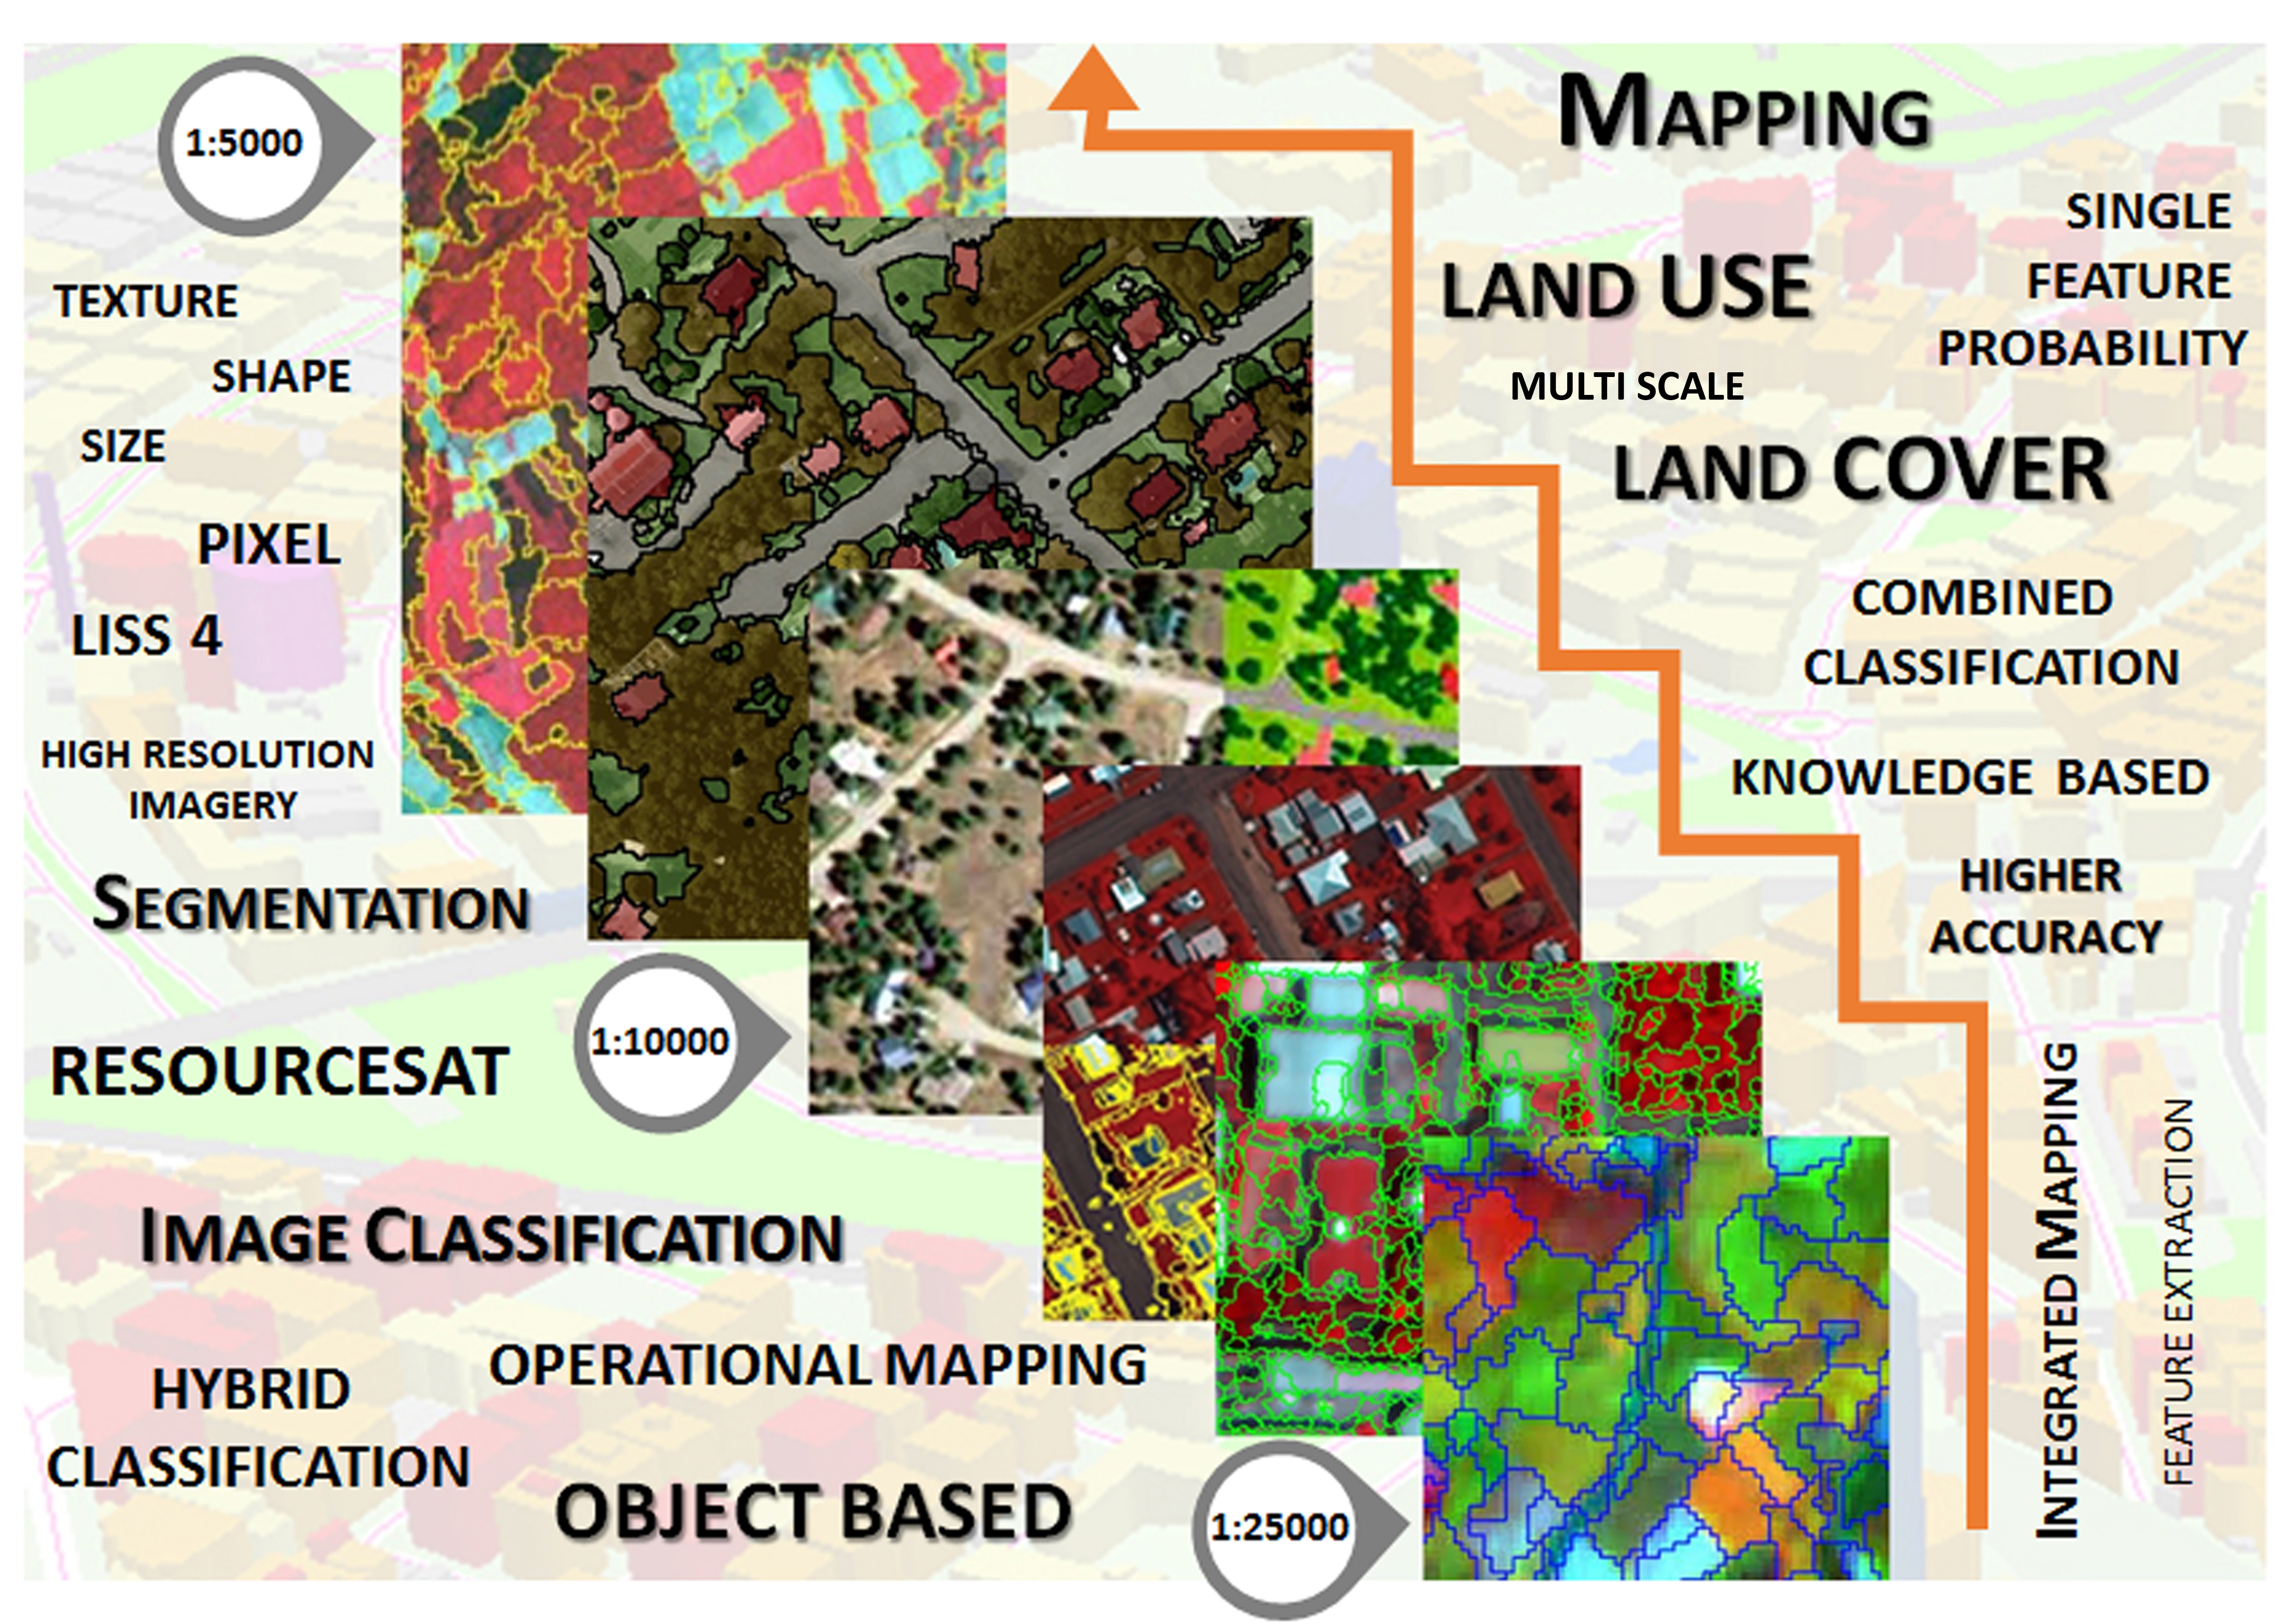 A Multi-Scale Feature Extraction Approach to Improve Land Use Land/Cover Classification Accuracy using IRS LISS-IV Imagery